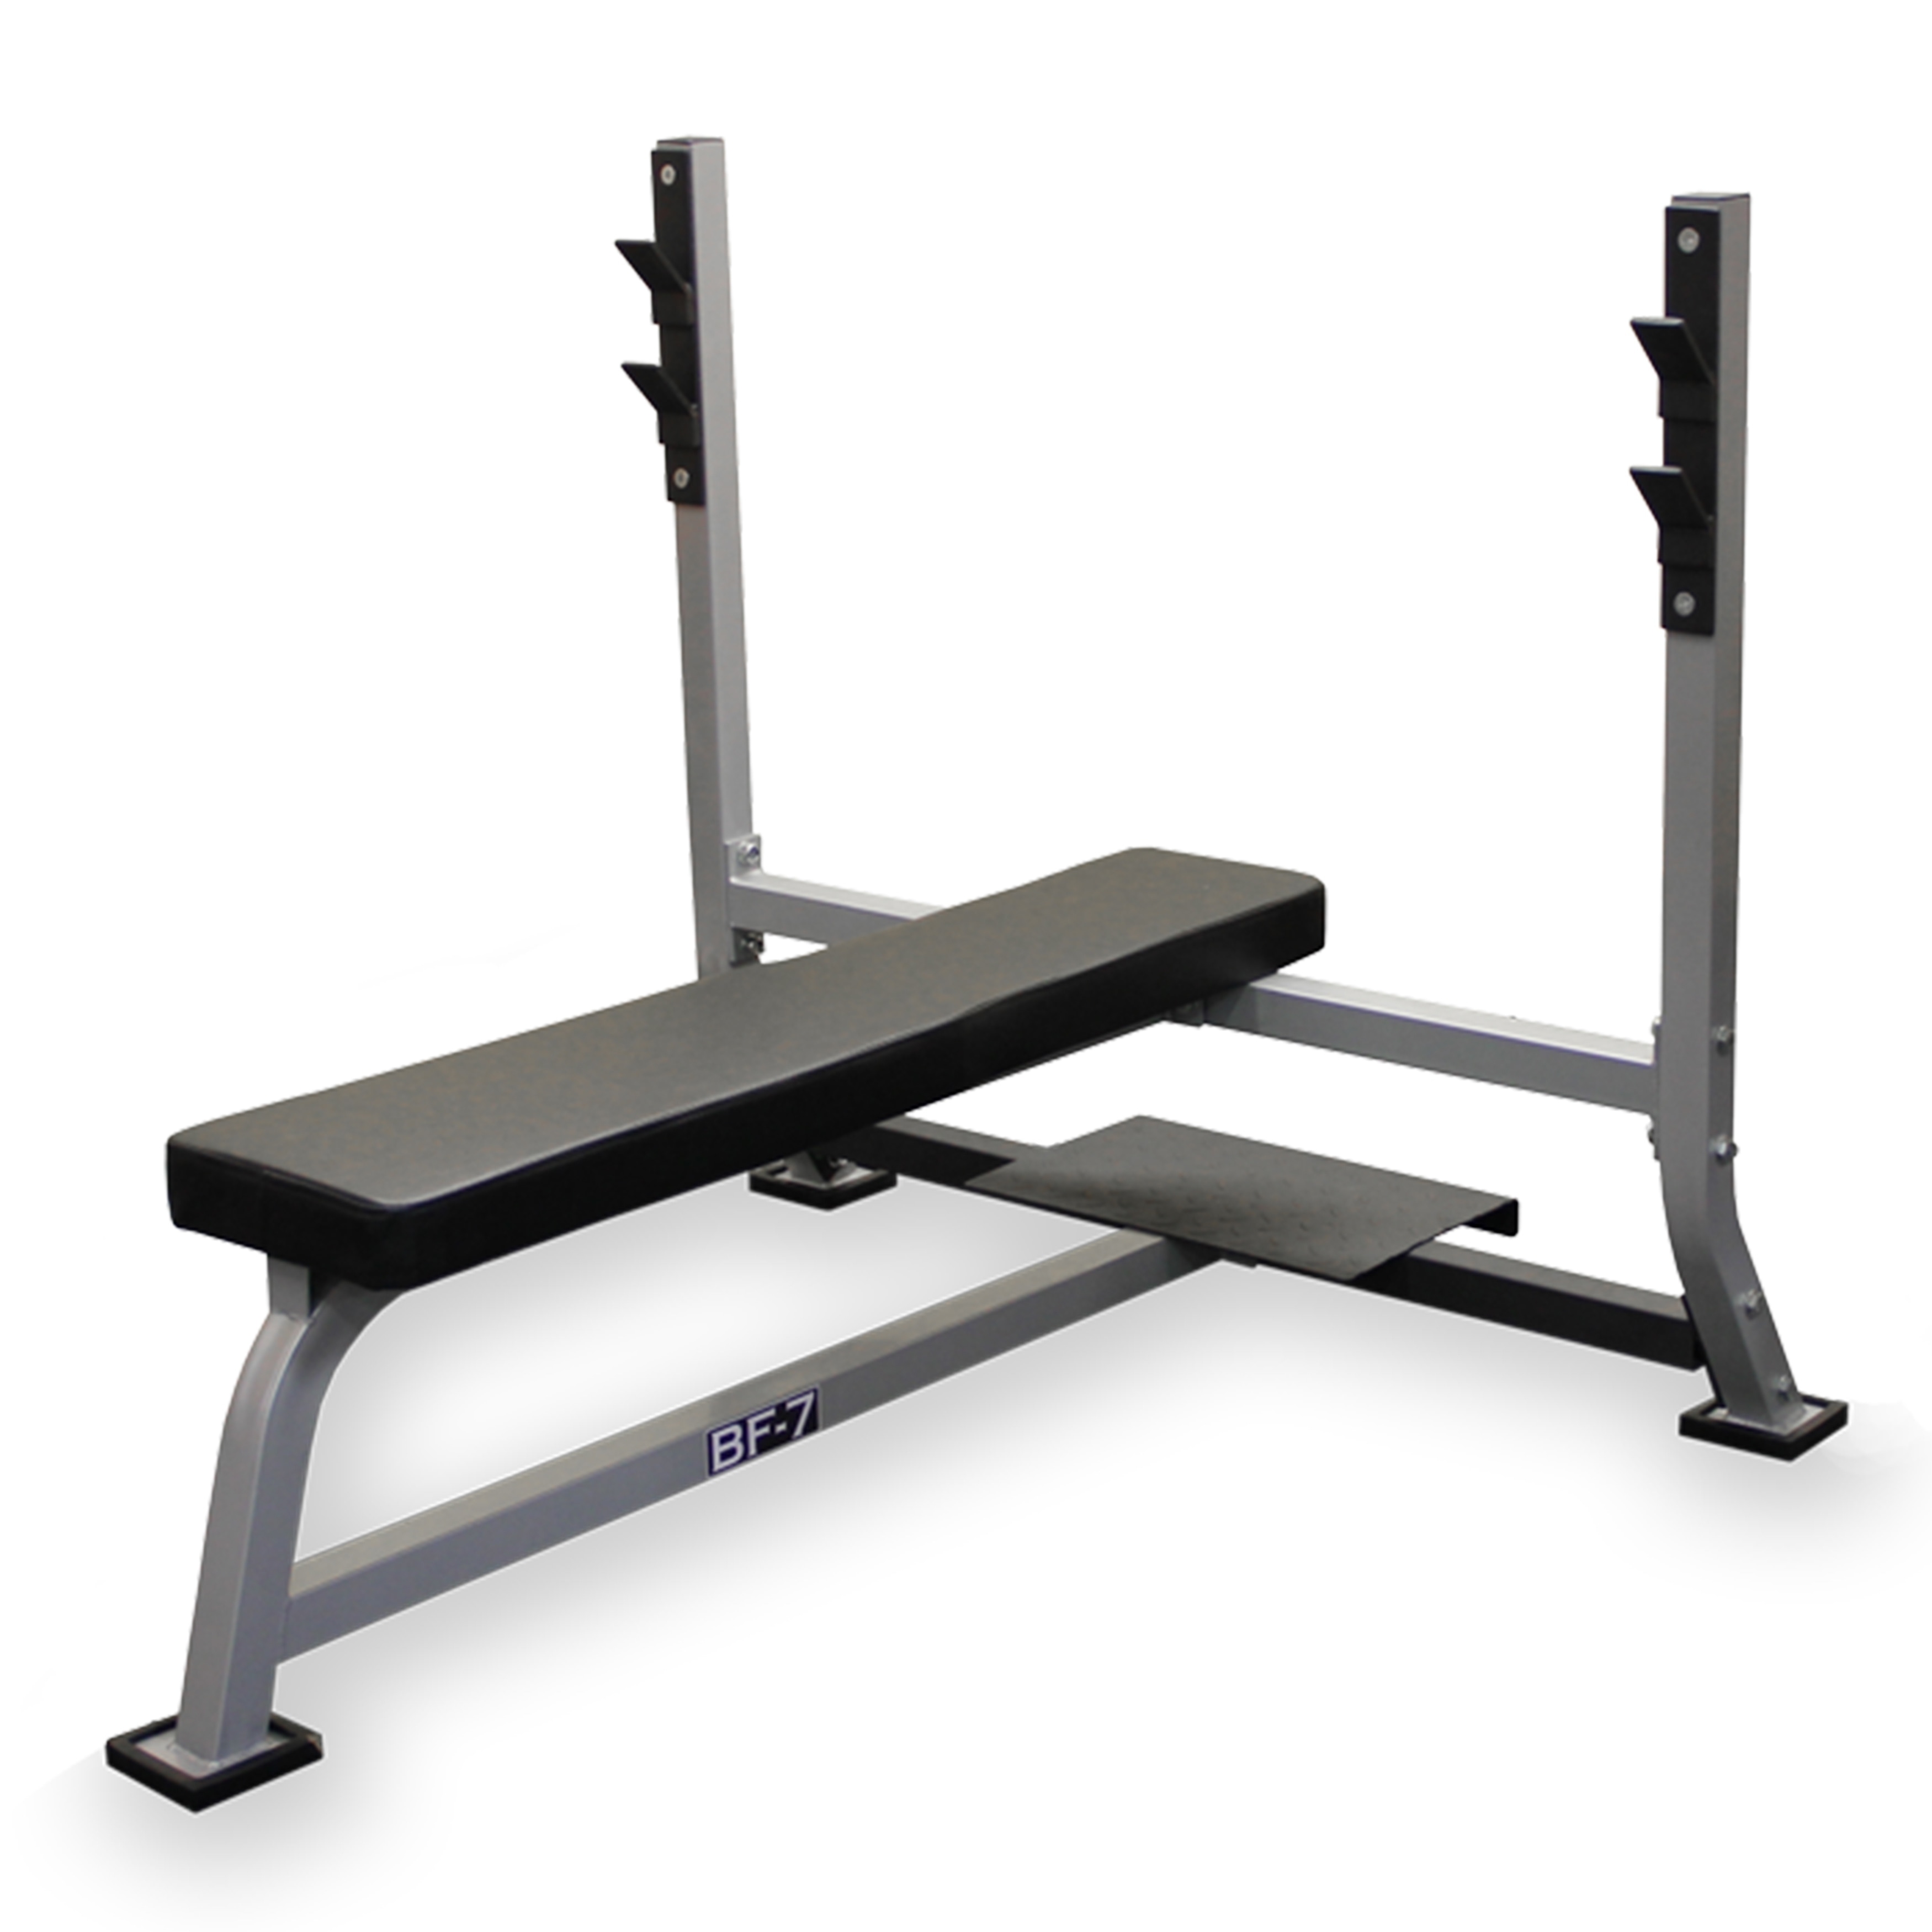 Valor Fitness Bf 7 Olympic Bench